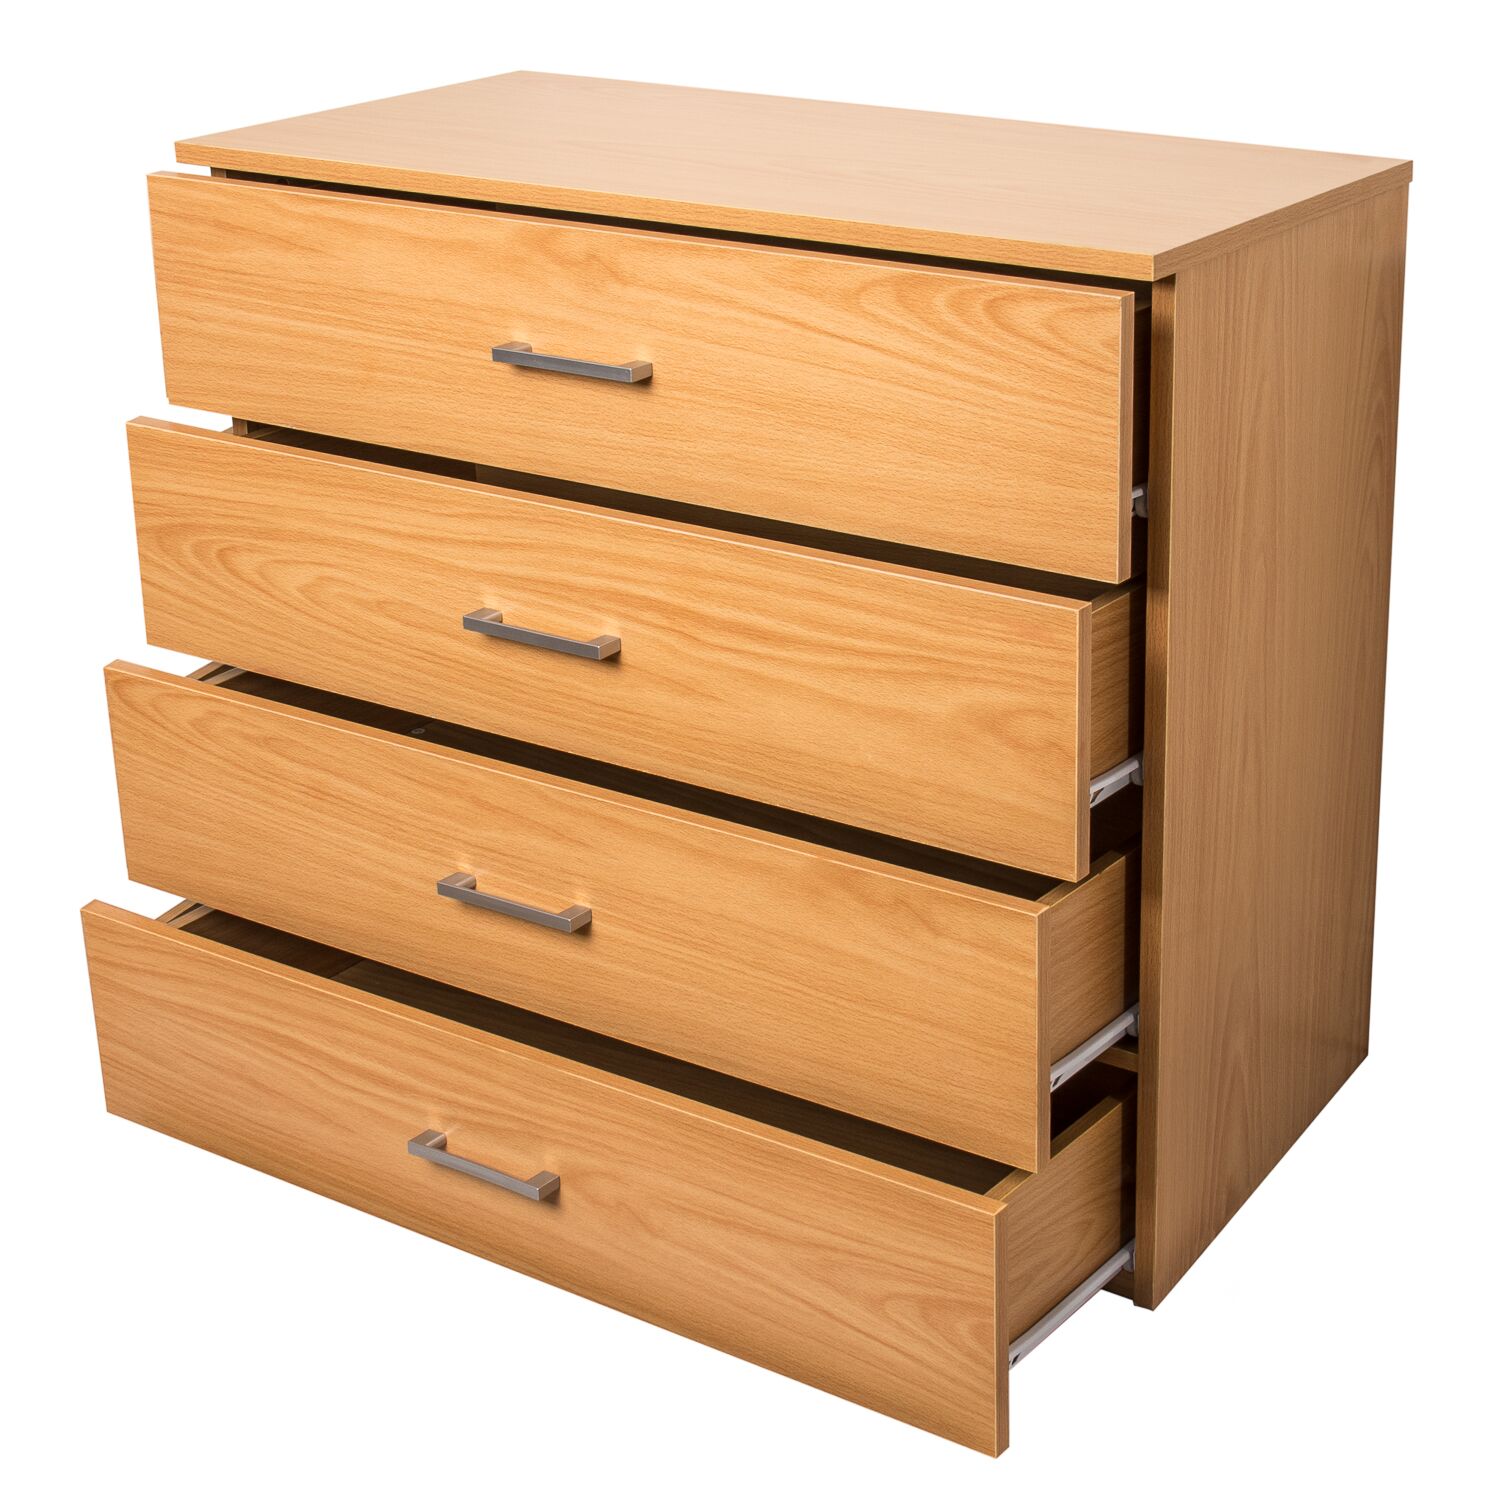 Buy Beech Wooden Chest of Drawers of 4 Drawers - Home ...